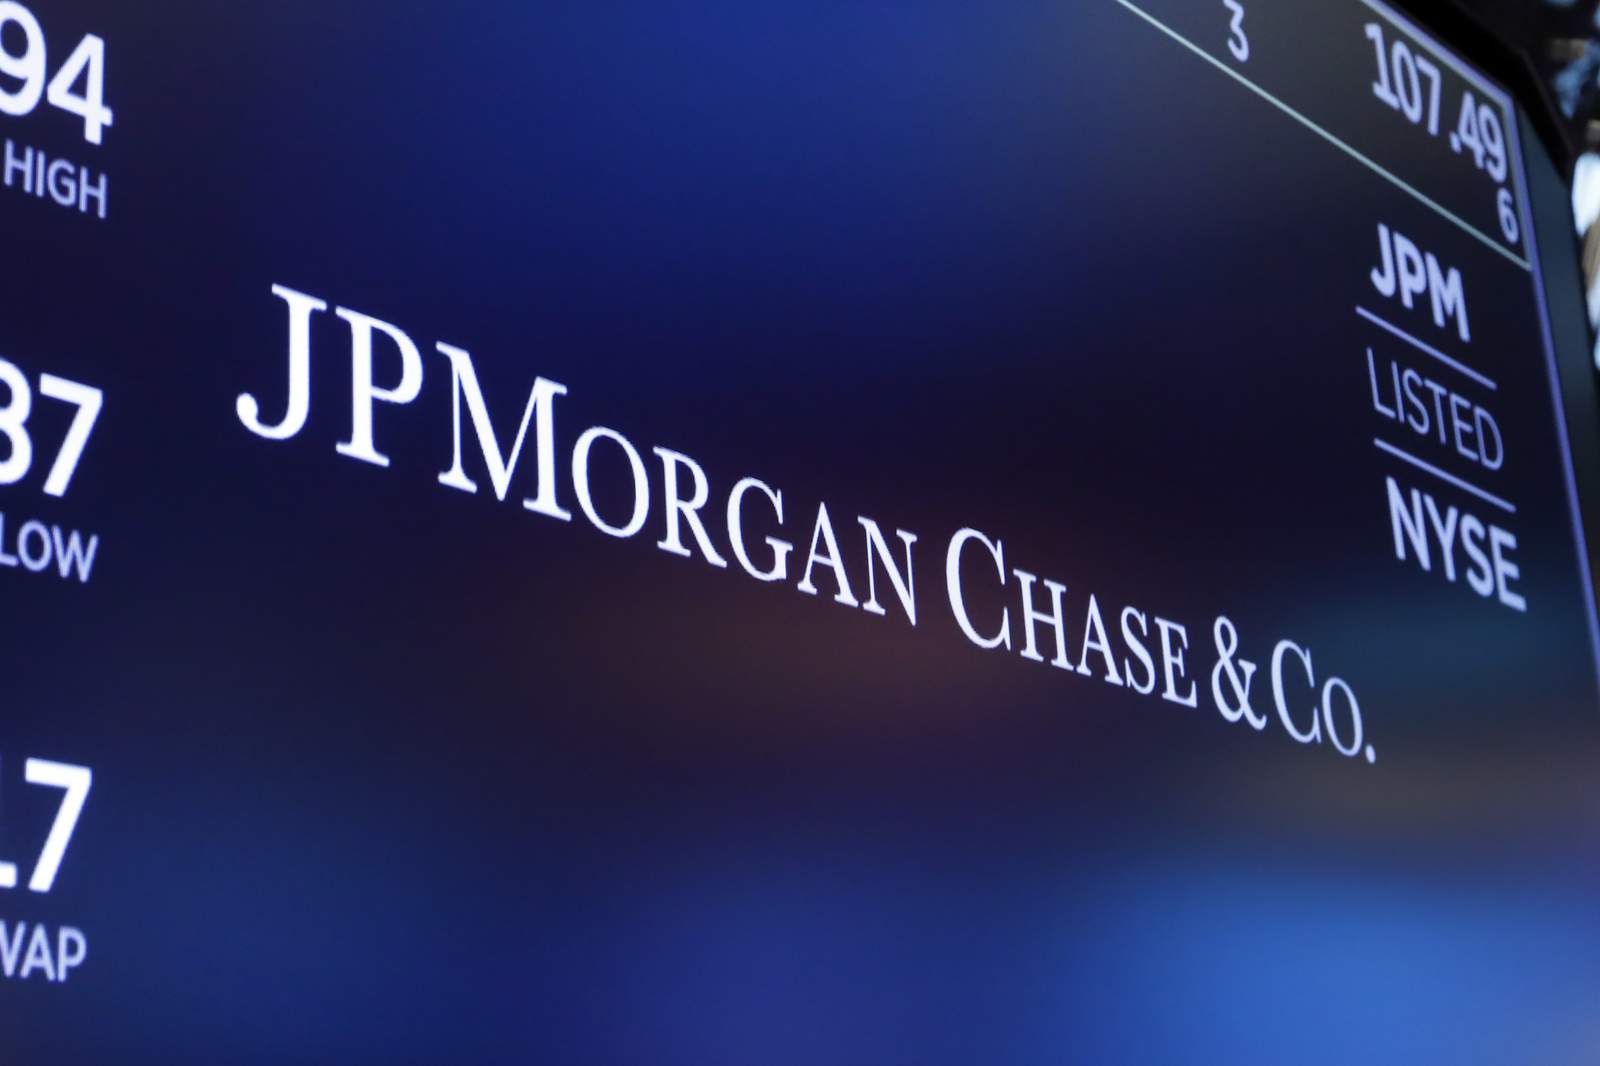 Some JPMorgan traders catch COVID as bank reopens offices